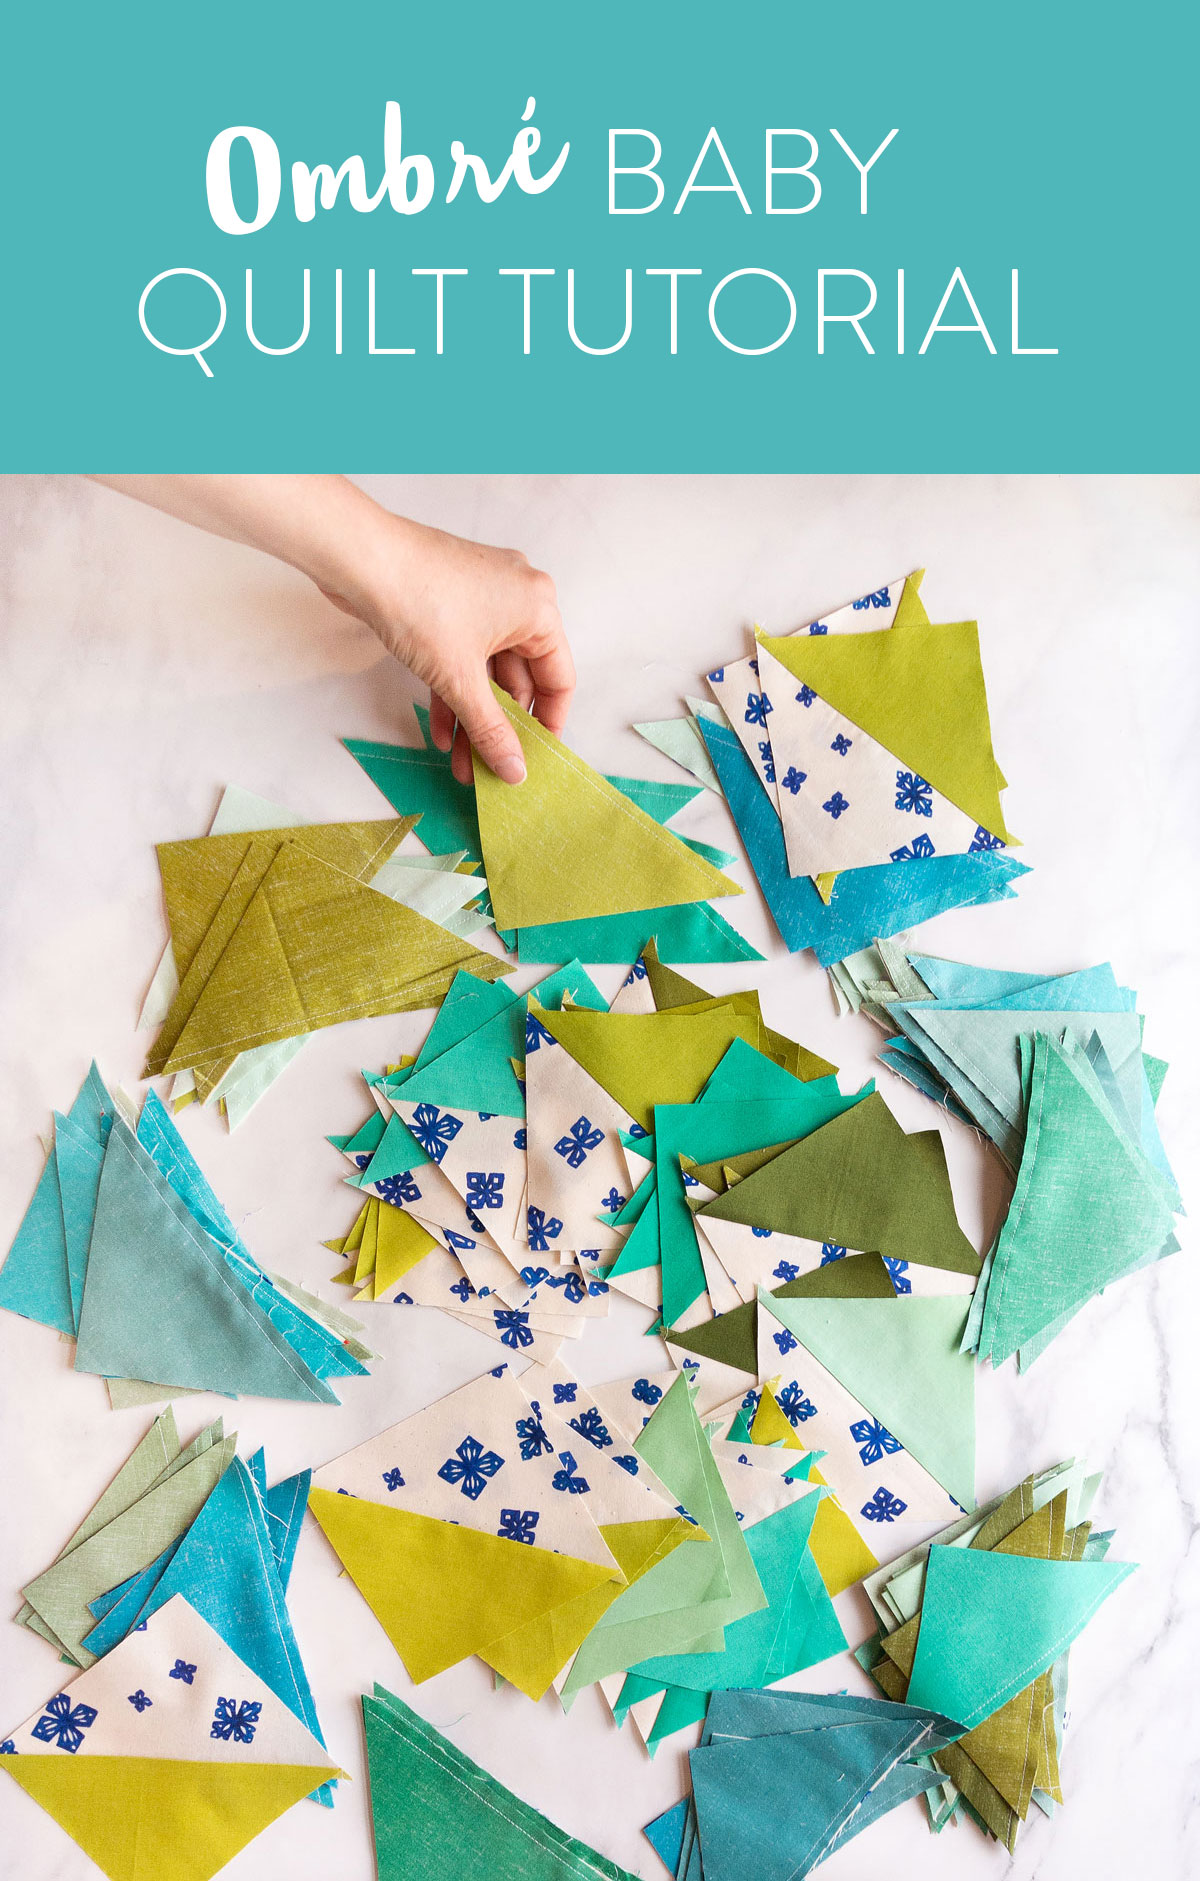 Make a Triangle Jitters quilt with 8 fat quarters! This is a beginner-friendly half square triangle pattern. Discover how to achieve this ombré effect with the exact fabrics I used! Suzy Quilts - https://suzyquilts.com/make-a-triangle-jitters-quilt-with-8-fat-quarters 